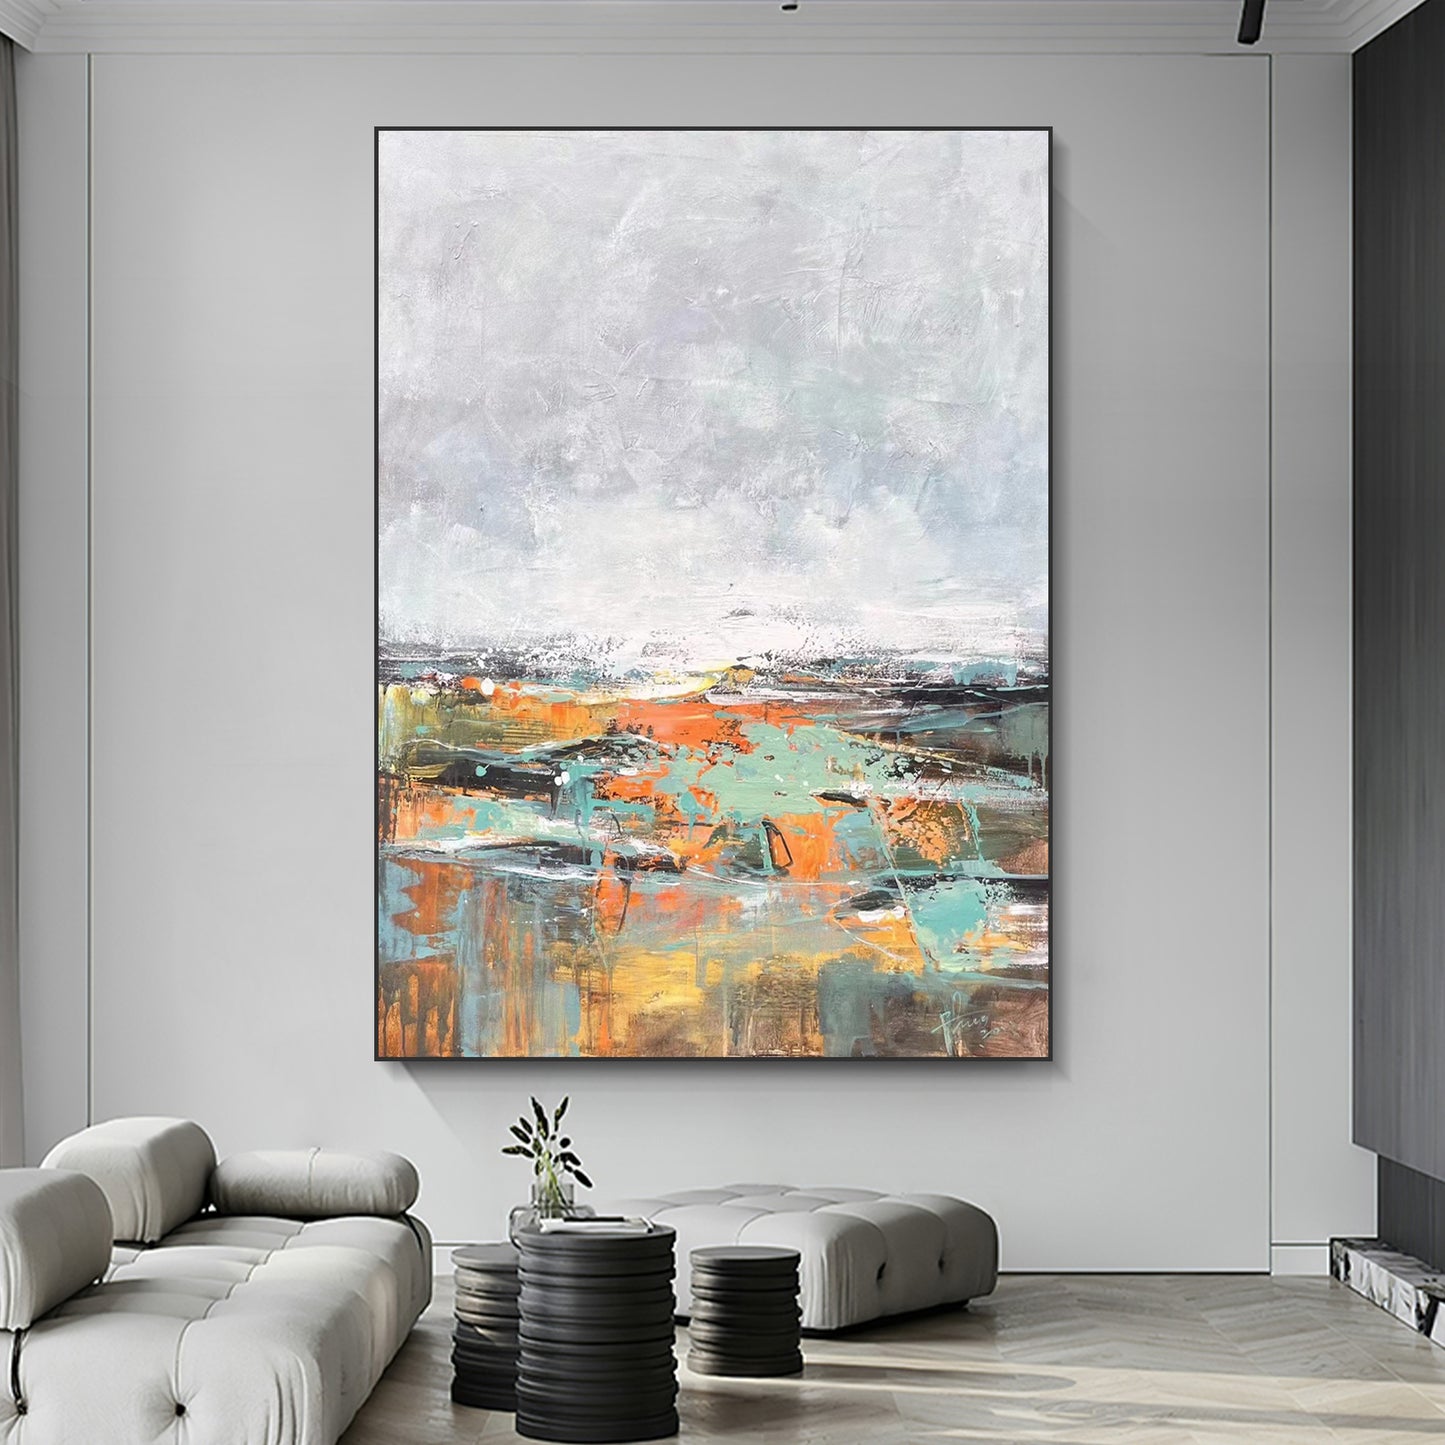 ABSTRACT PAINTING, SPRING, HAND-PAINTED CANVAS